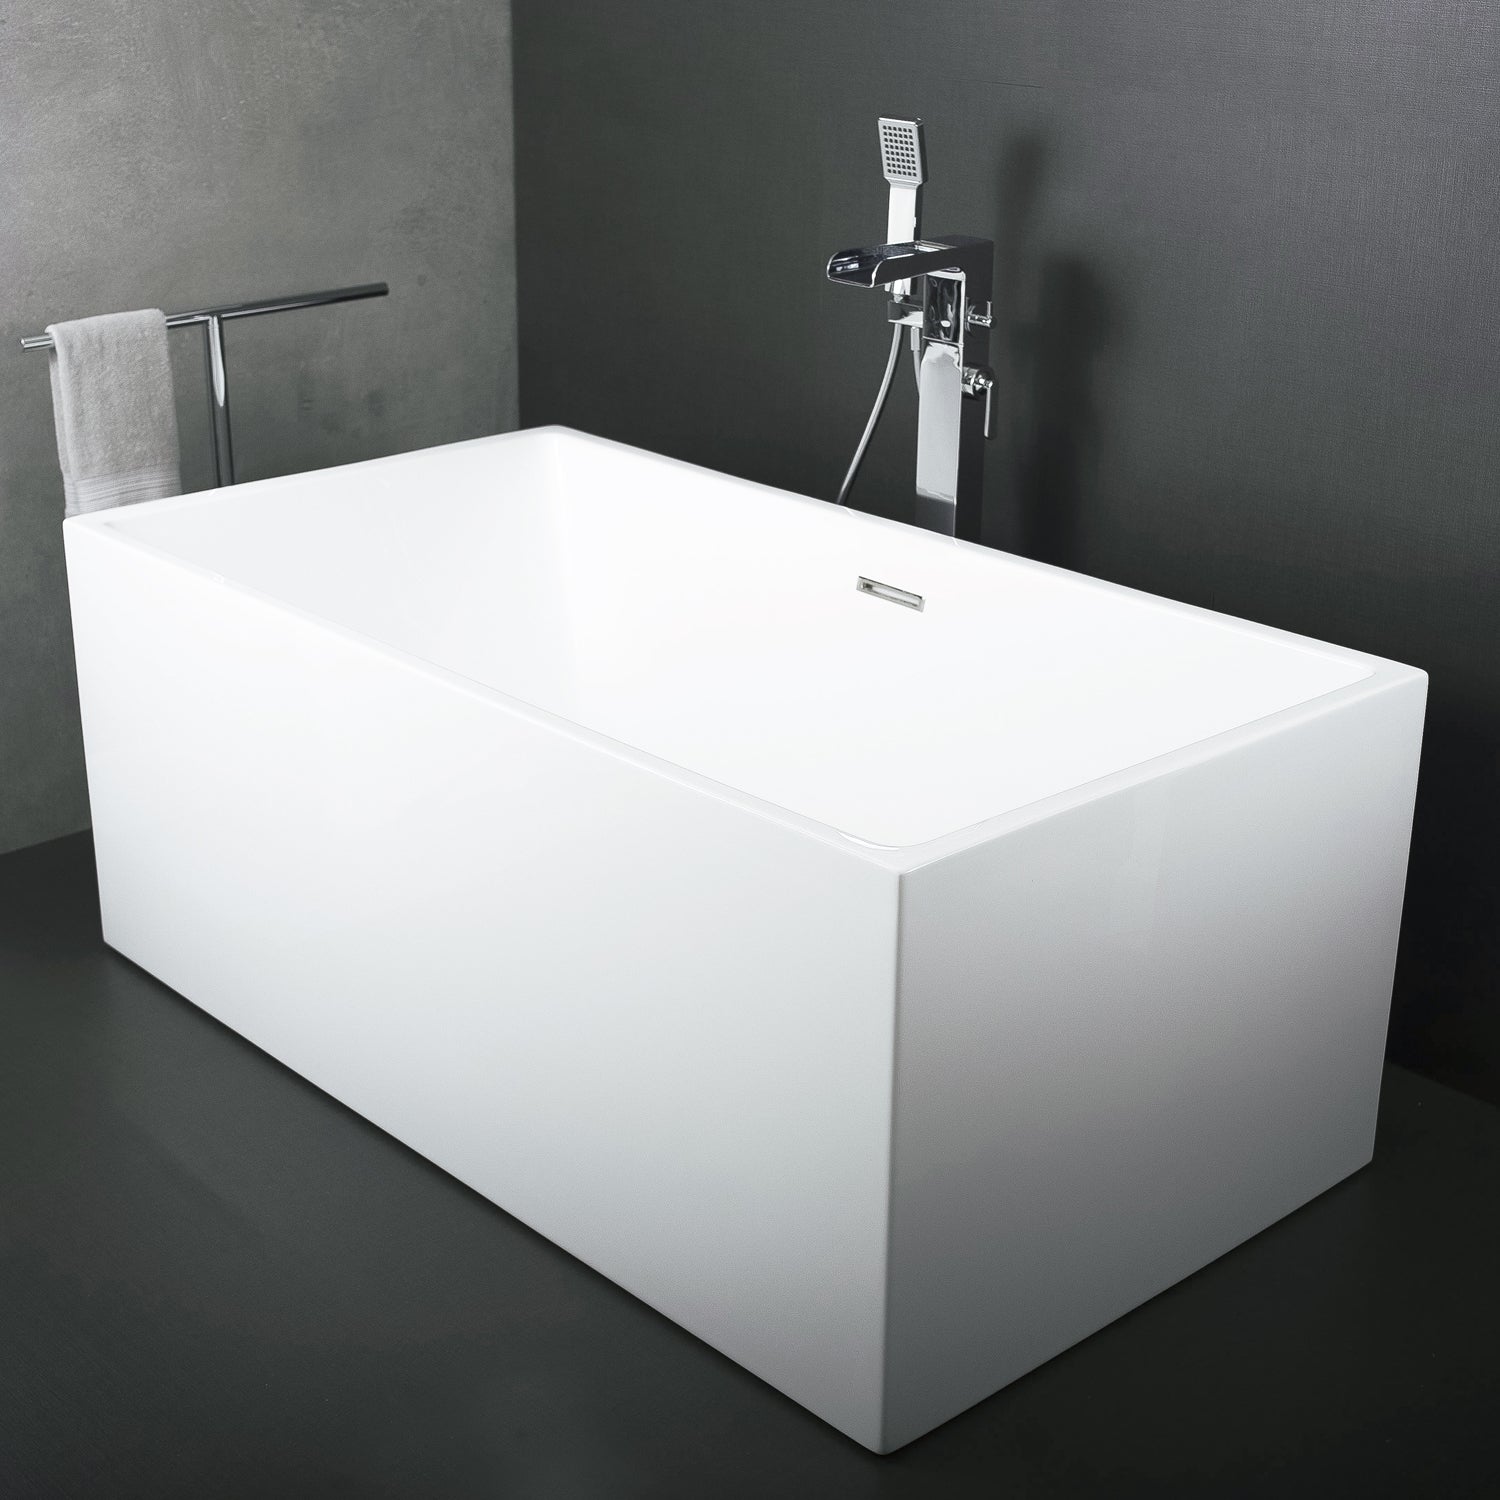 DAX Square Freestanding High Gloss Acrylic Bathtub with Central Drain and Overflow, Stainless Steel Frame, 59-1/16 x 23-5/8 x 31-1/2 Inches (BT-8013A)